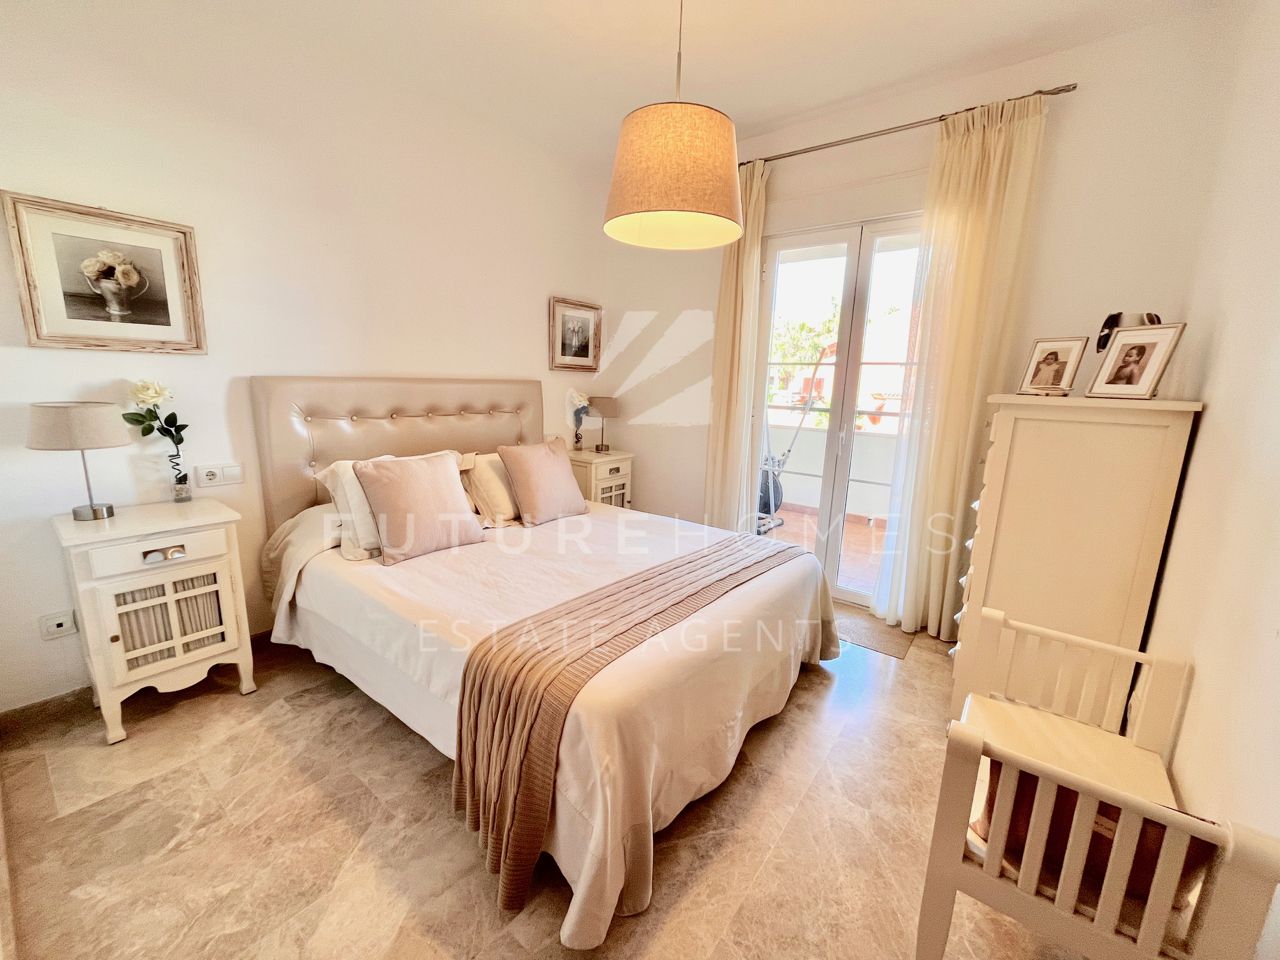 ESTEPONA PORT - Very spacious apartment with 4 bedrooms and underground parking. 